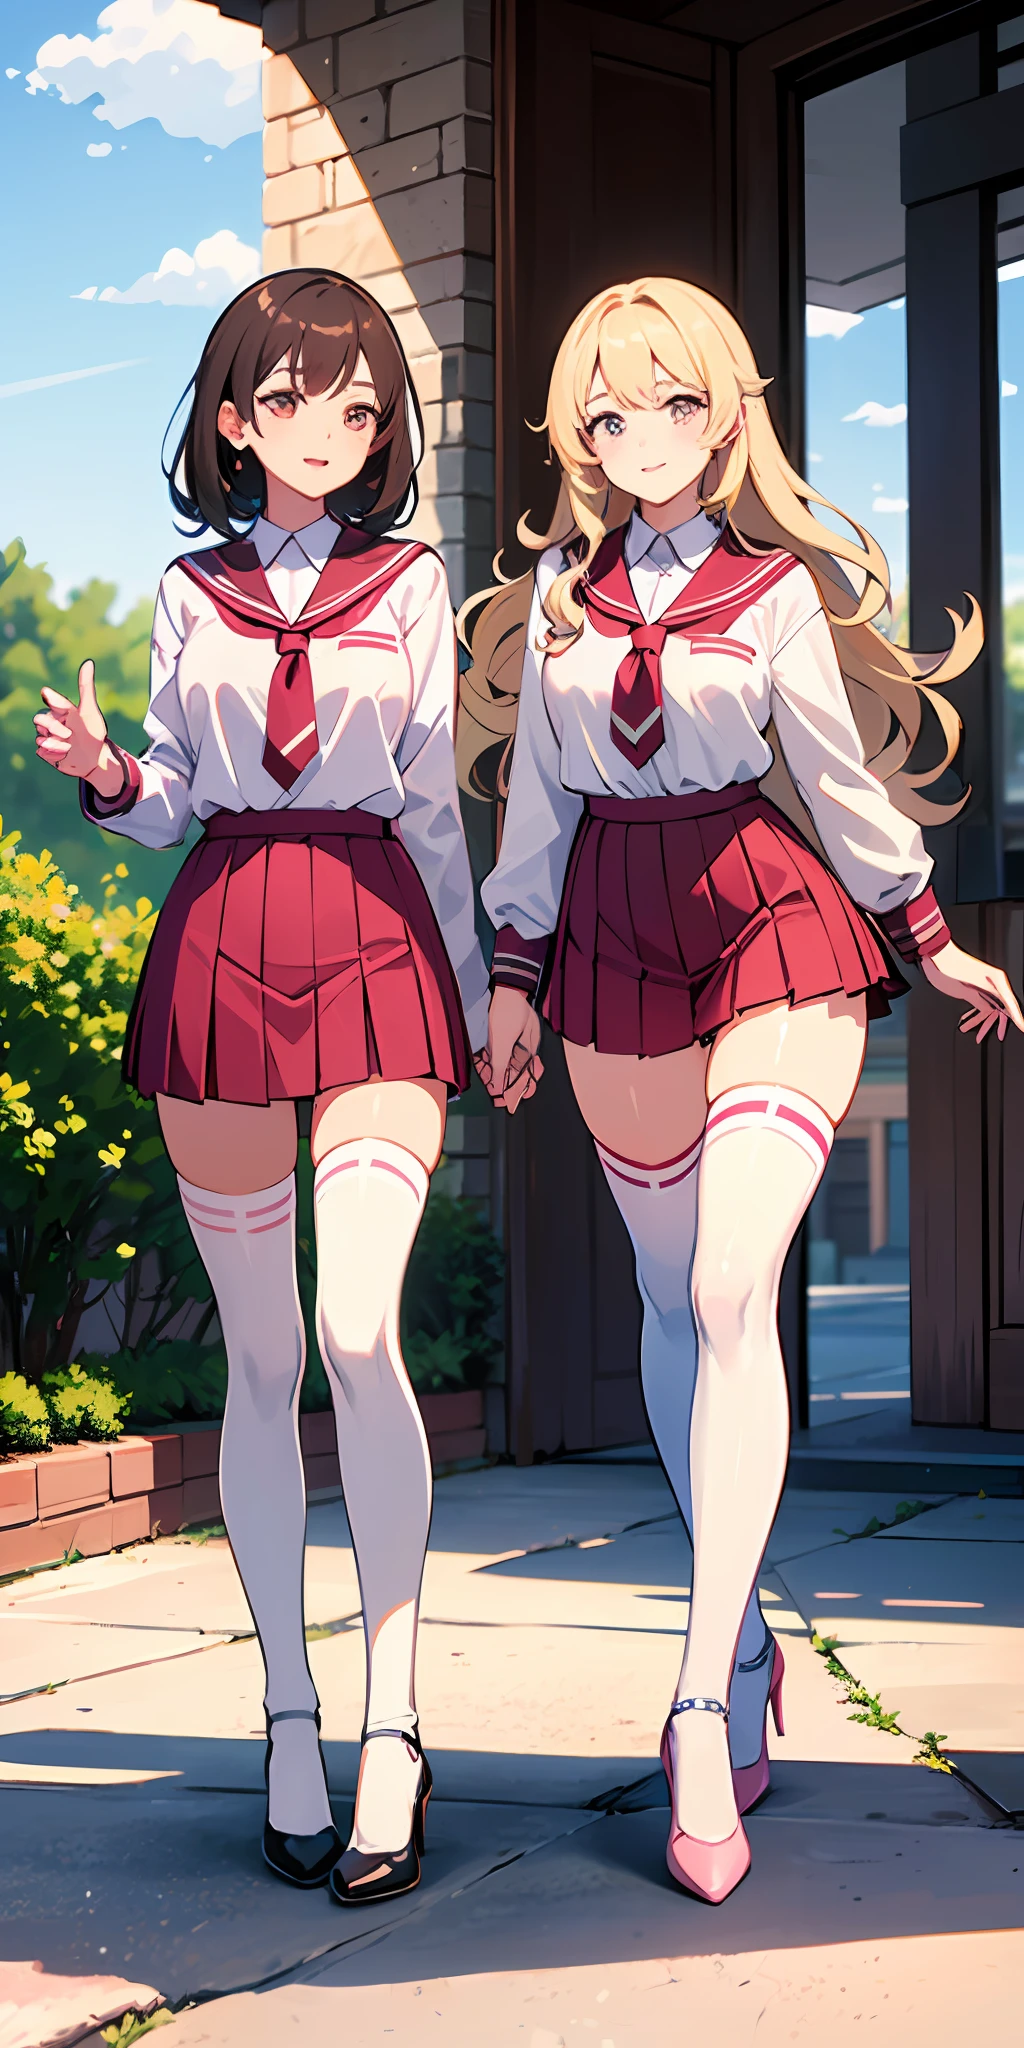 ((Masterpiece, highres)), 2girls, duo, twins, ((one brown haired girl, one blonde girl)), long hair, curly hair, matching hairstyles, different hair color, confident, elegant, rich girls, proud smiles, matching faces, hazel eyes, same size busts, (((matching outfits, identical outfits, pink school uniforms, sexy school uniforms, white thighhighs, long white socks, black high heels))), standing at attention, shoulder to shoulder, same pose, mansion